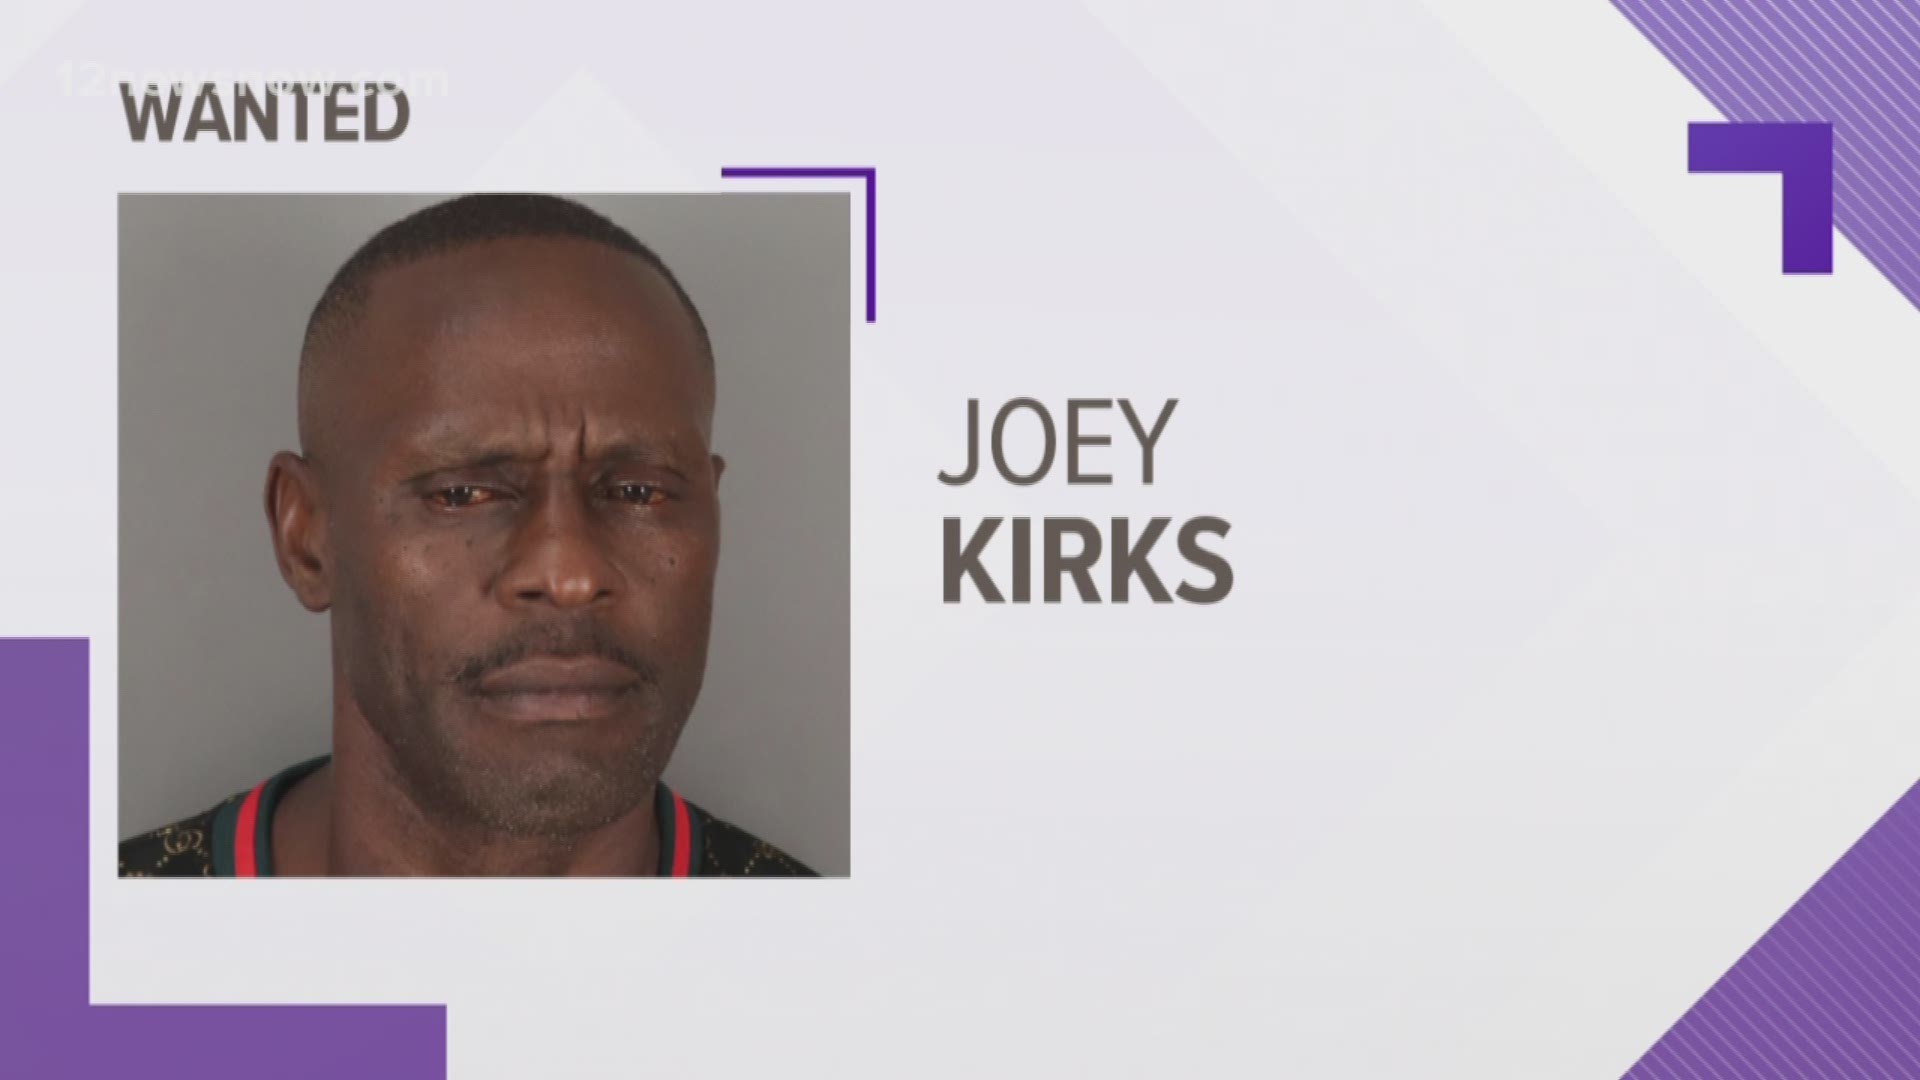 Authorities are looking for Joey Kirks